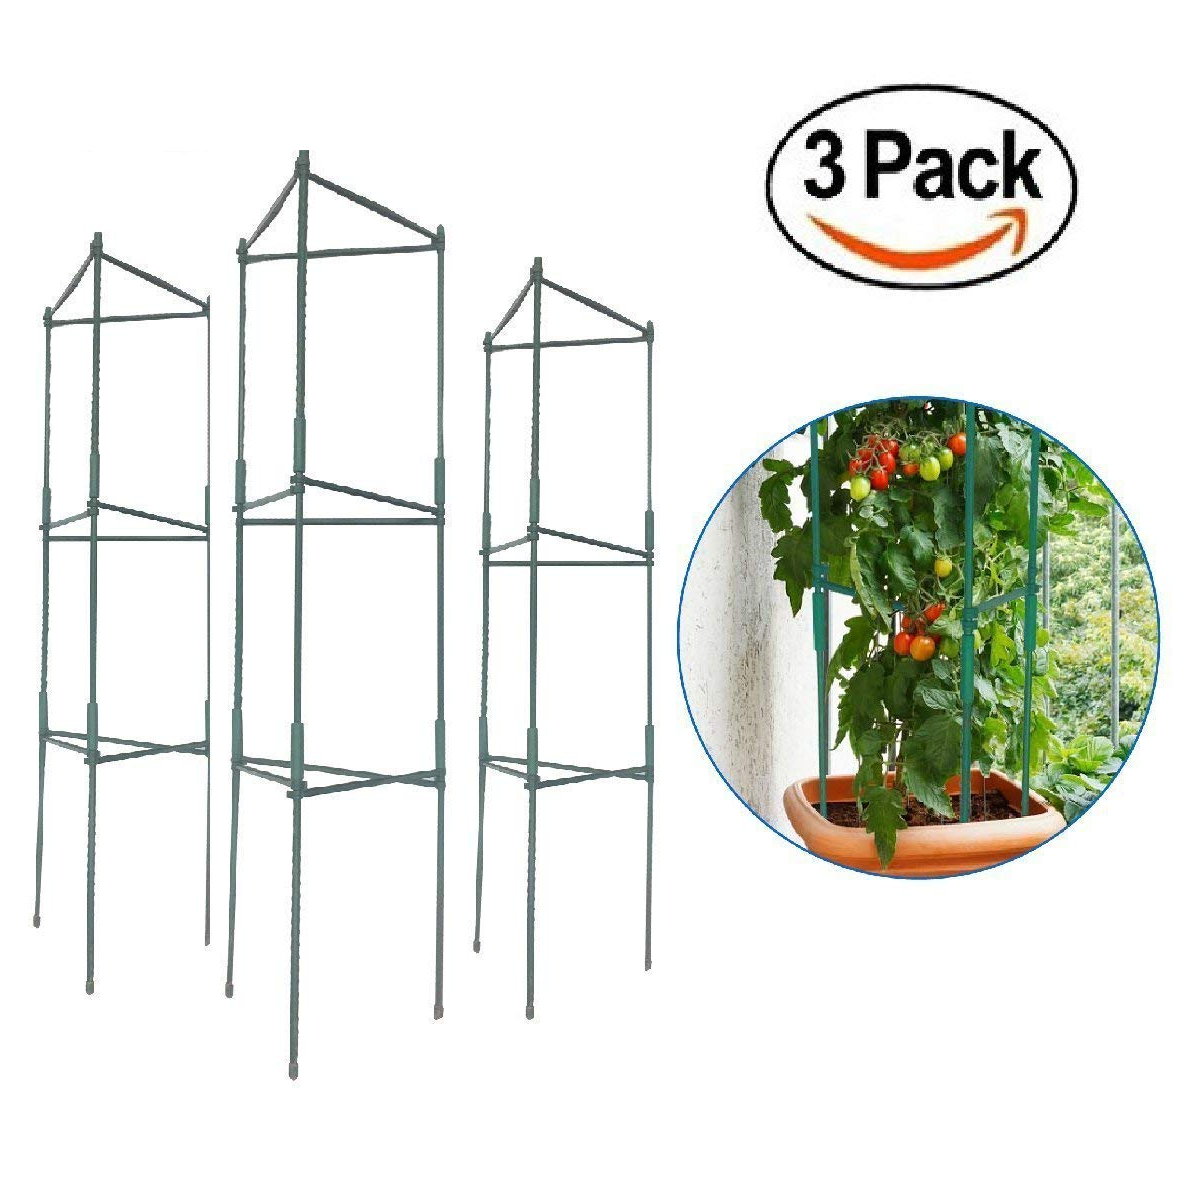 Tomato Cages Stakes-Vegetable Trellis 3 Pack Only $26.77 Shipped!